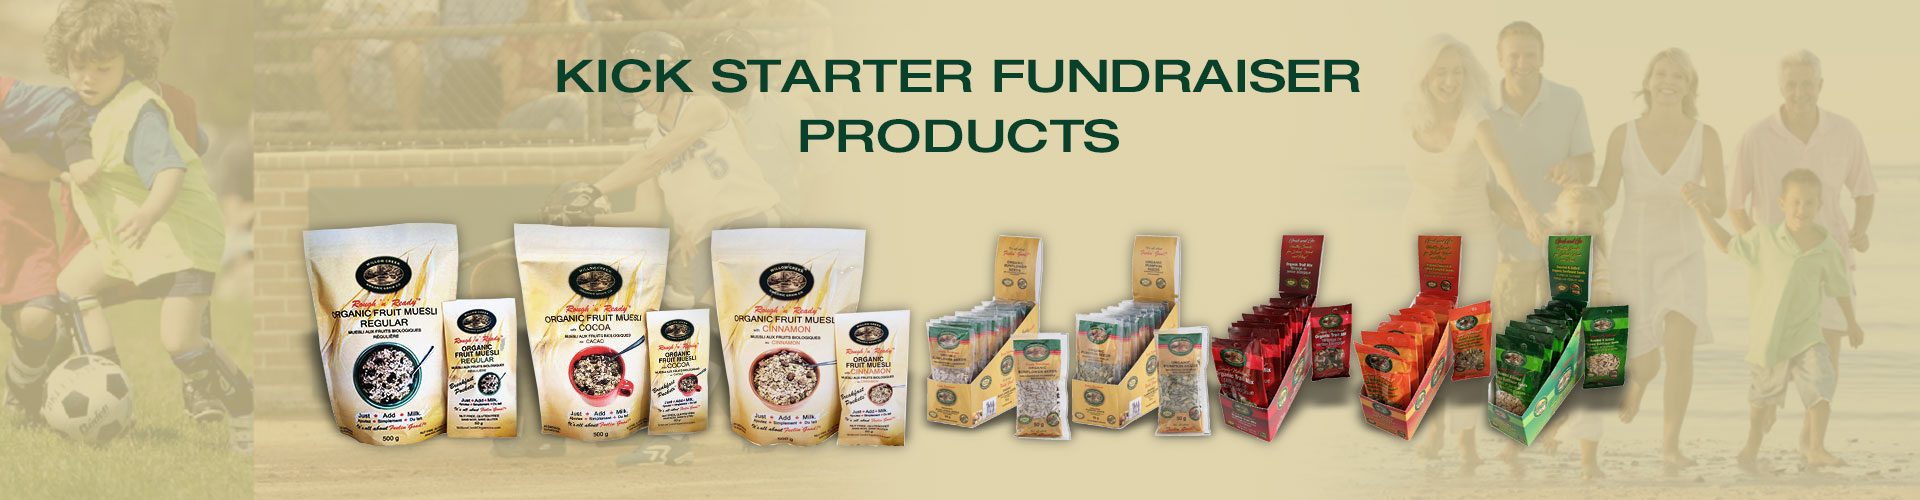 Kick Starter Fundraiser Products